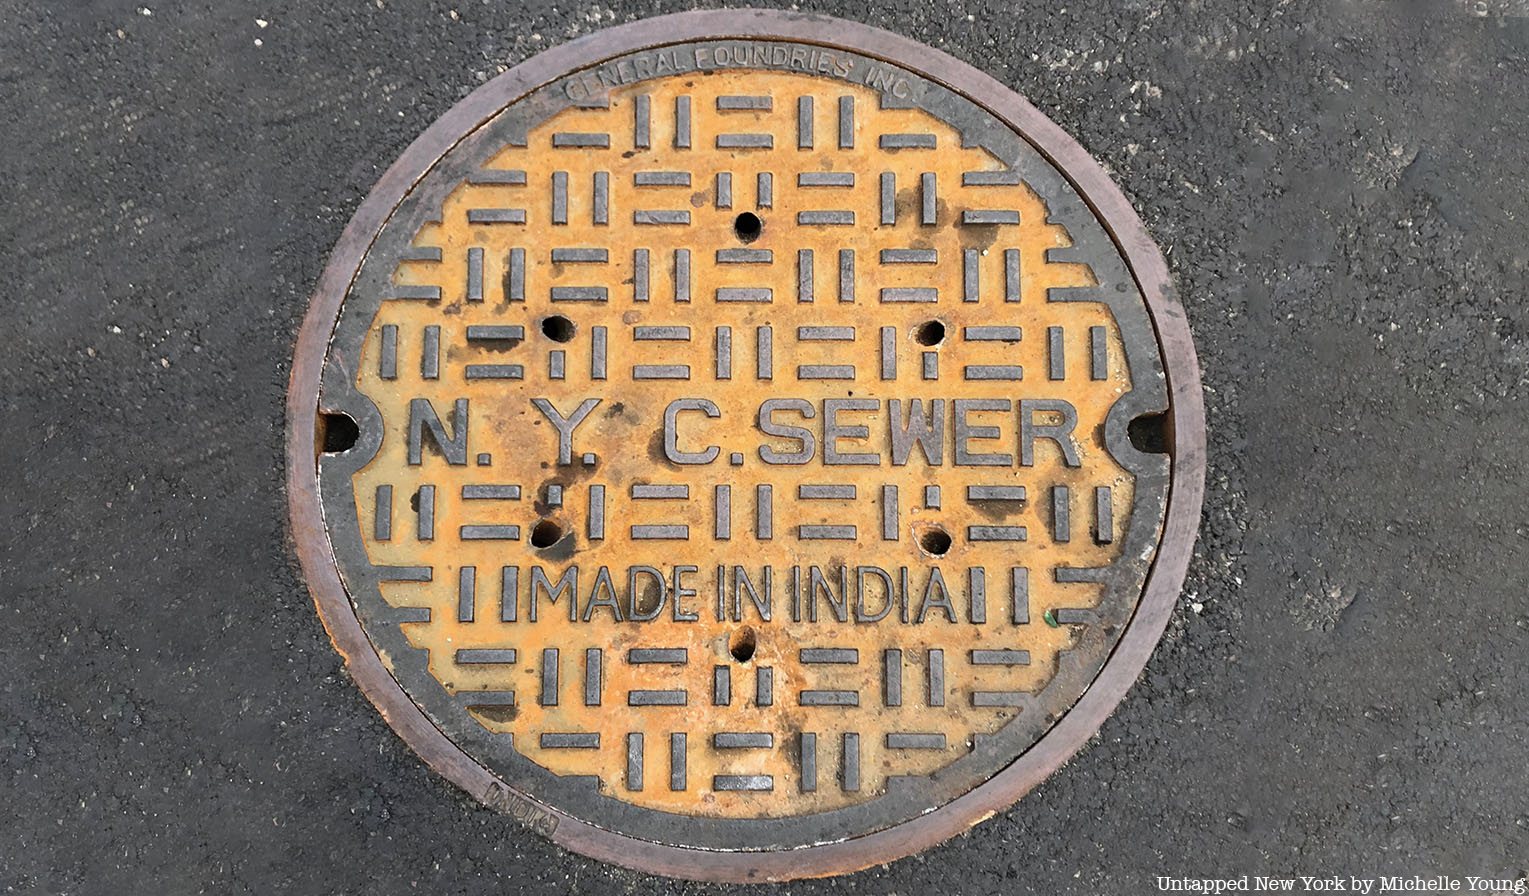  NYC Sewer Manhole Cover why are manhole covers round? 